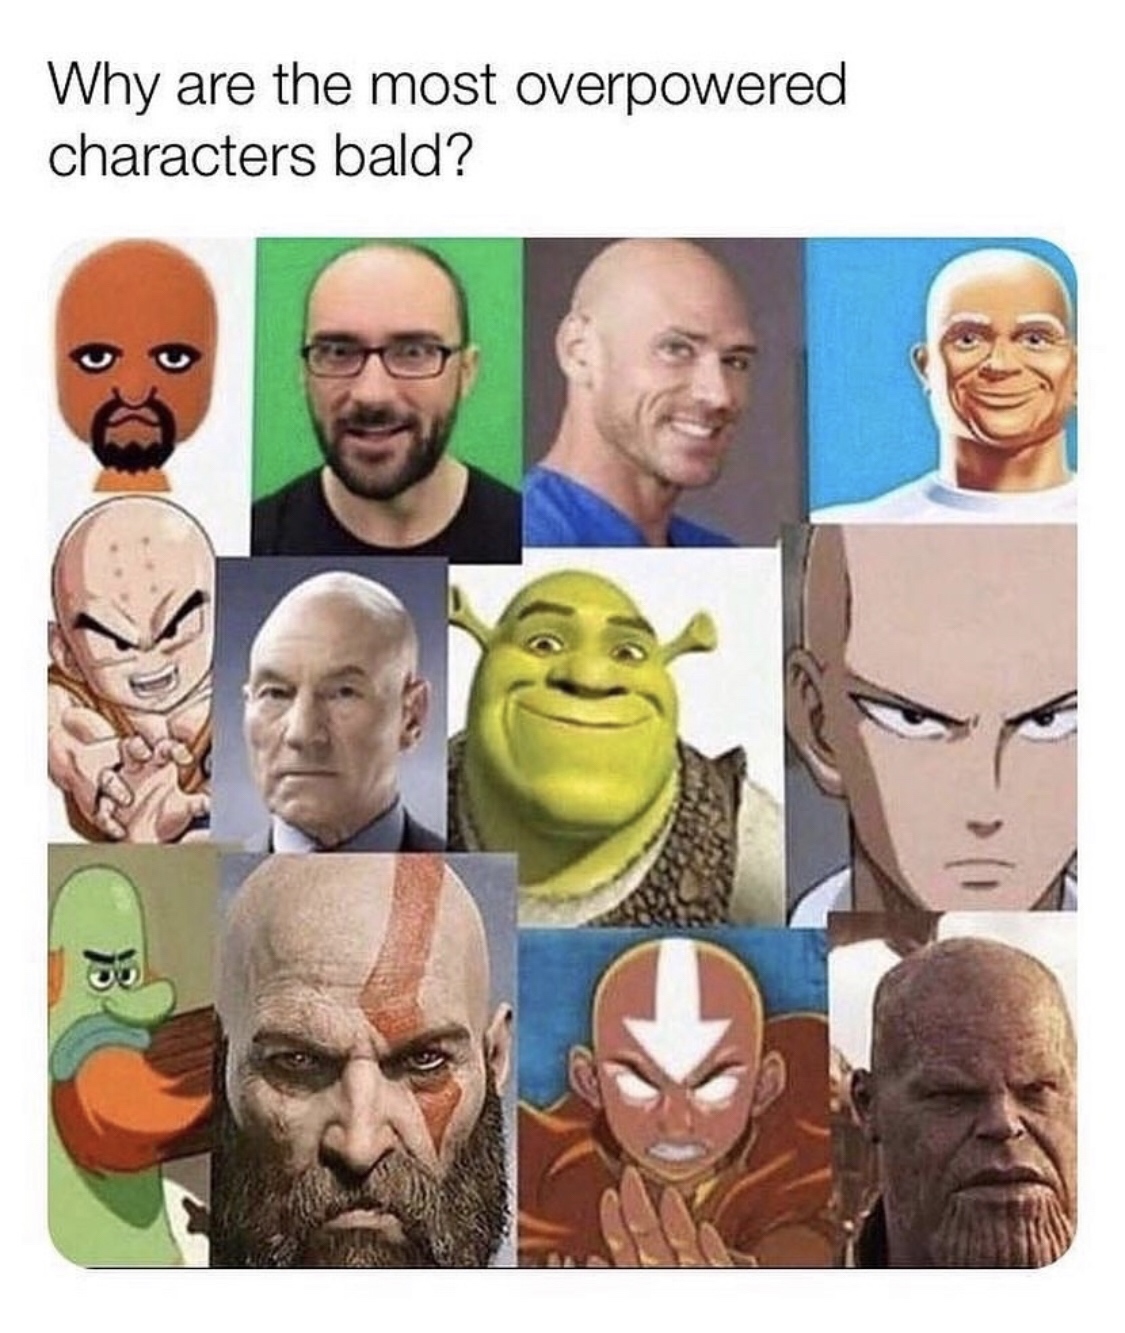 all the most overpowered characters bald - Why are the most overpowered characters bald?